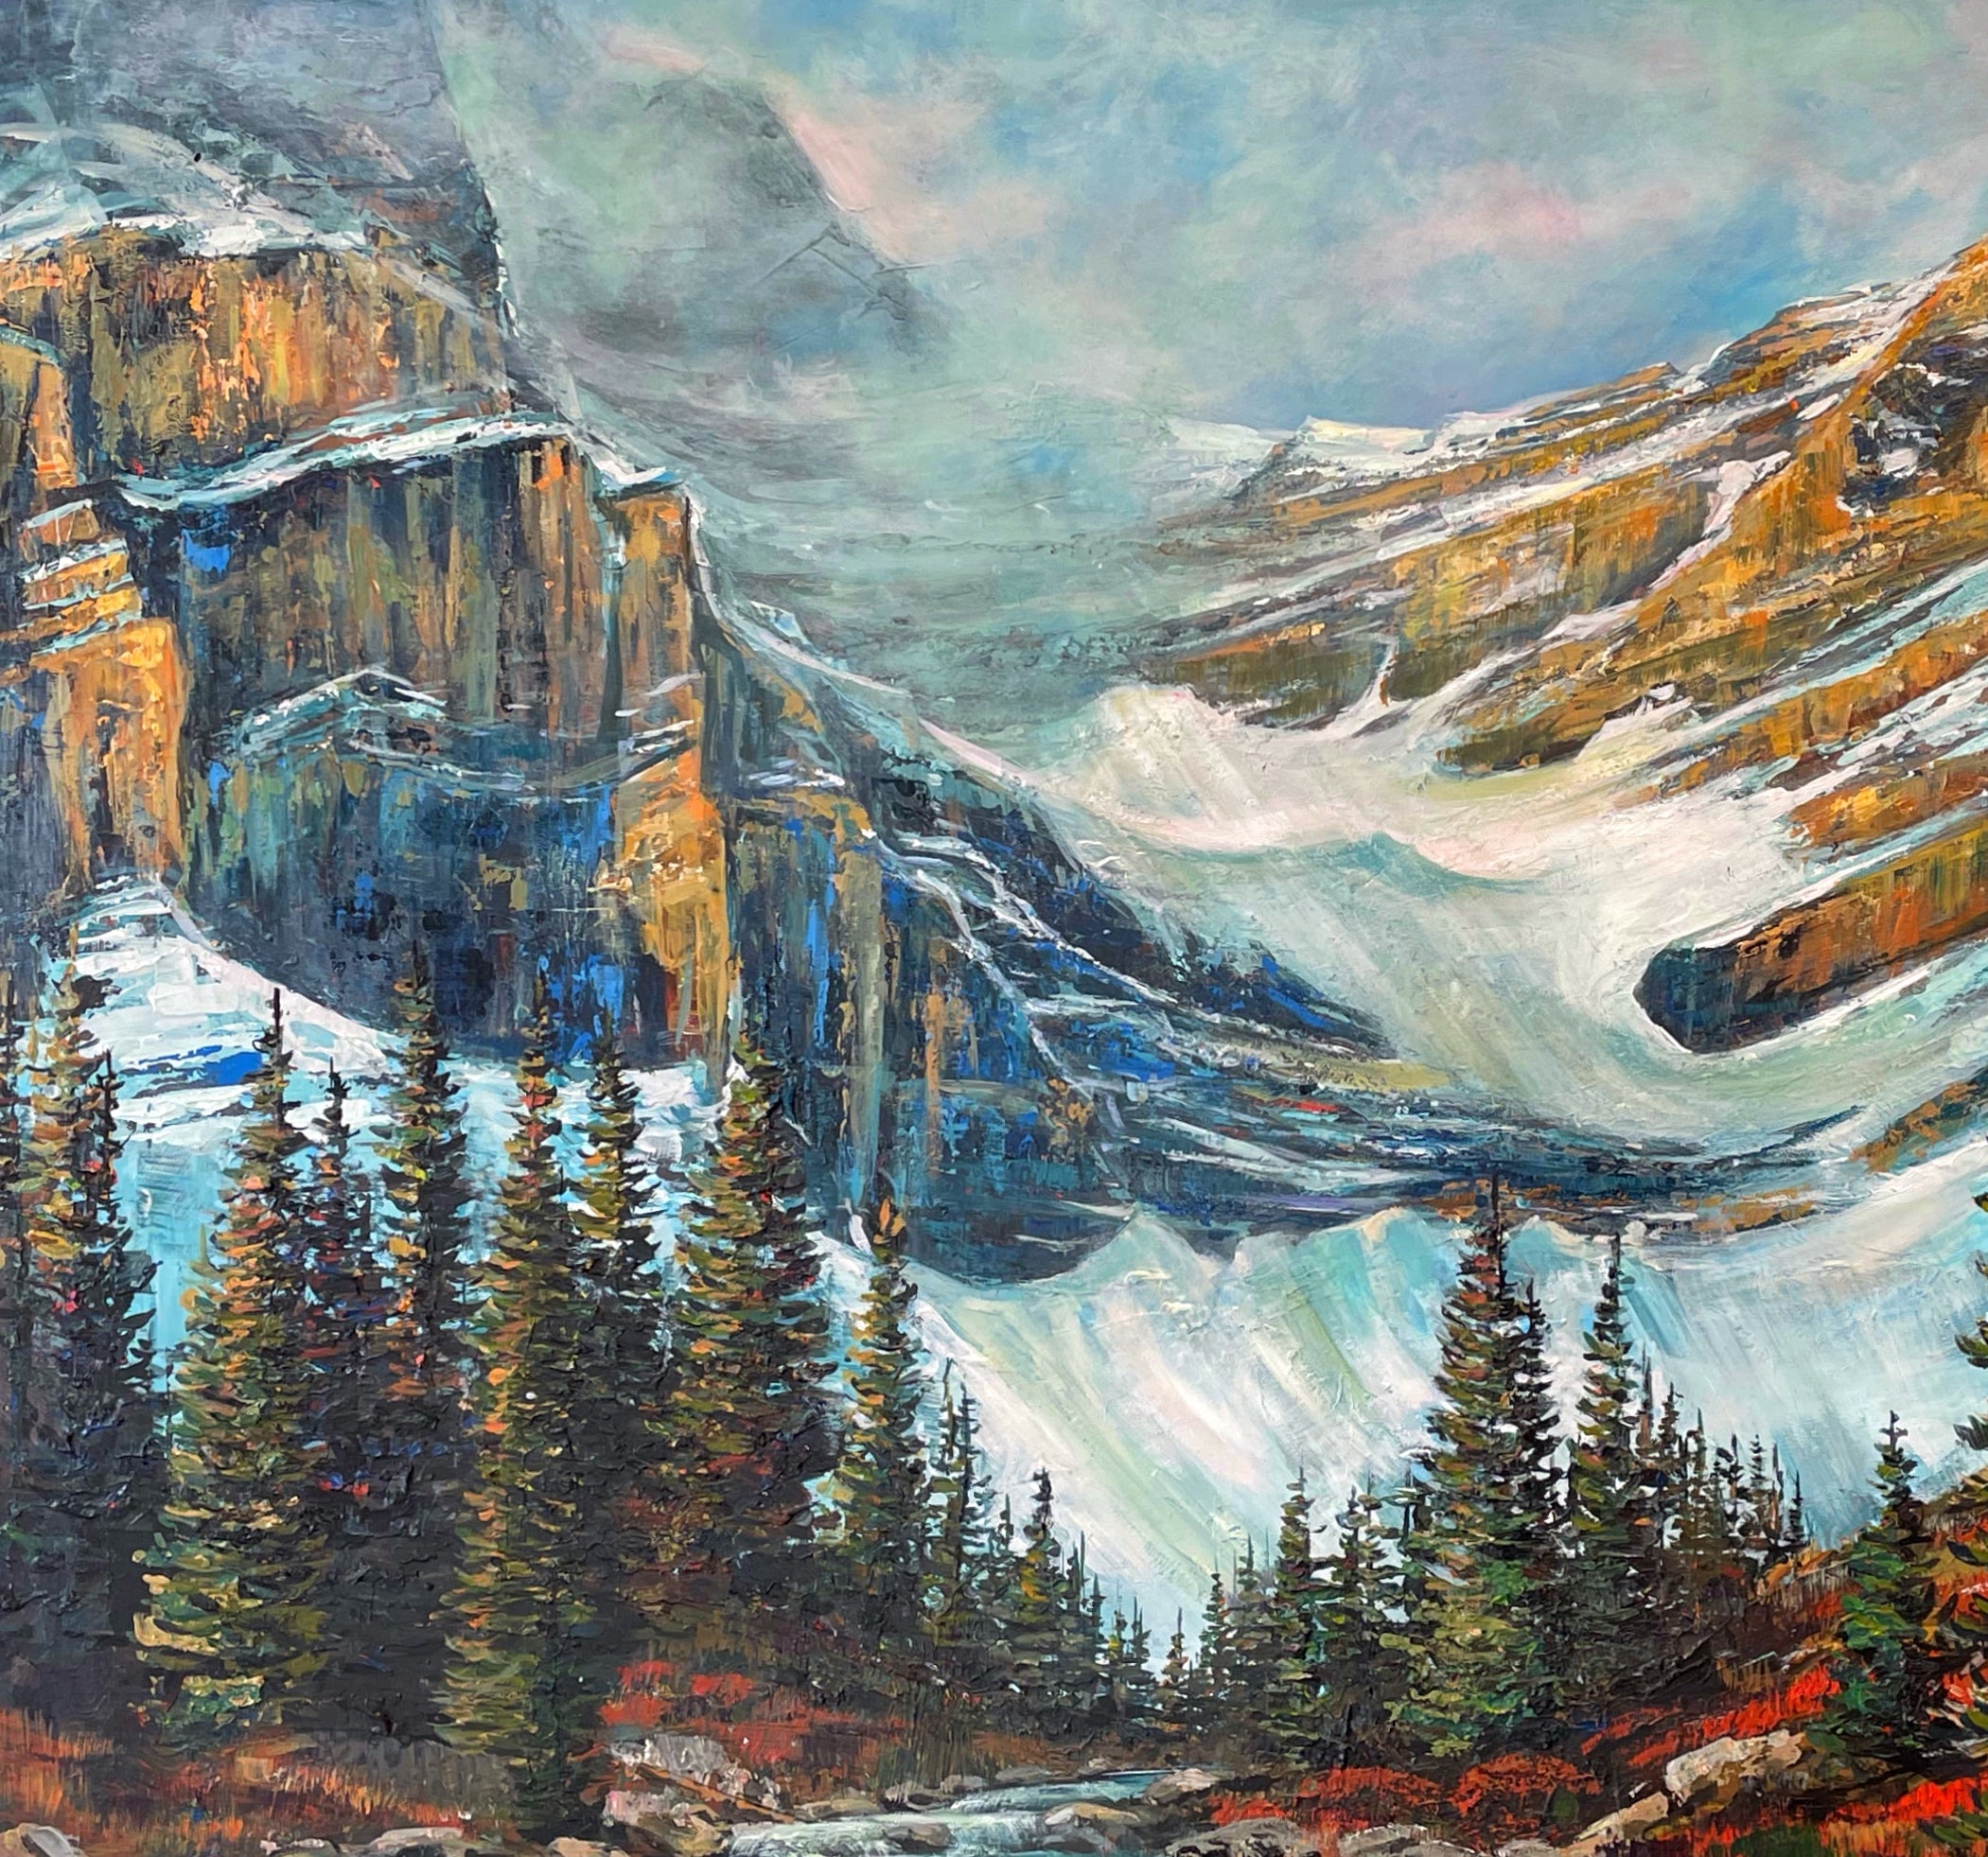 WORKSHOP - MOUNTAIN PALETTE KNIFE PAINTING